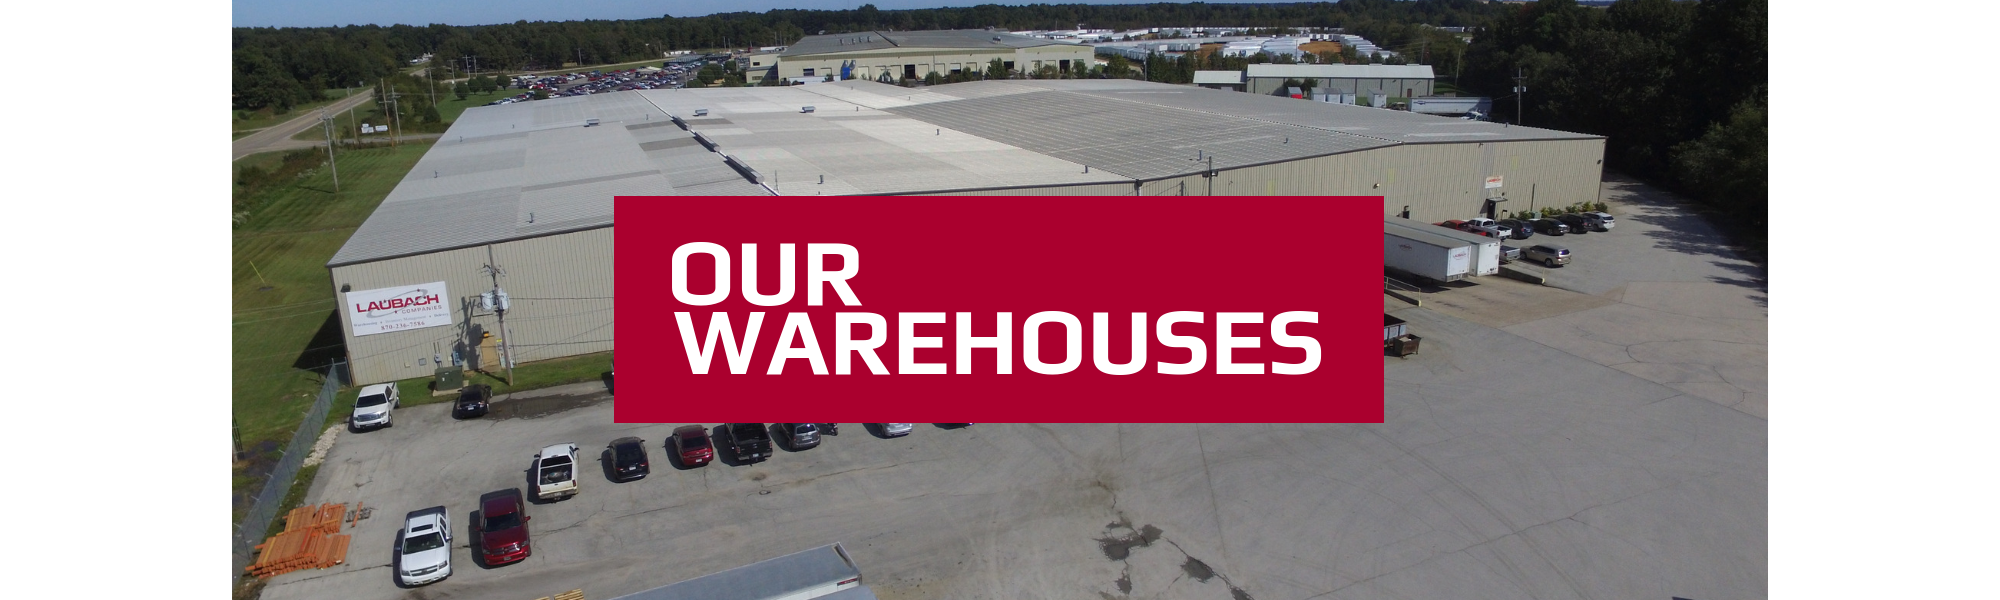 Our Warehouses 